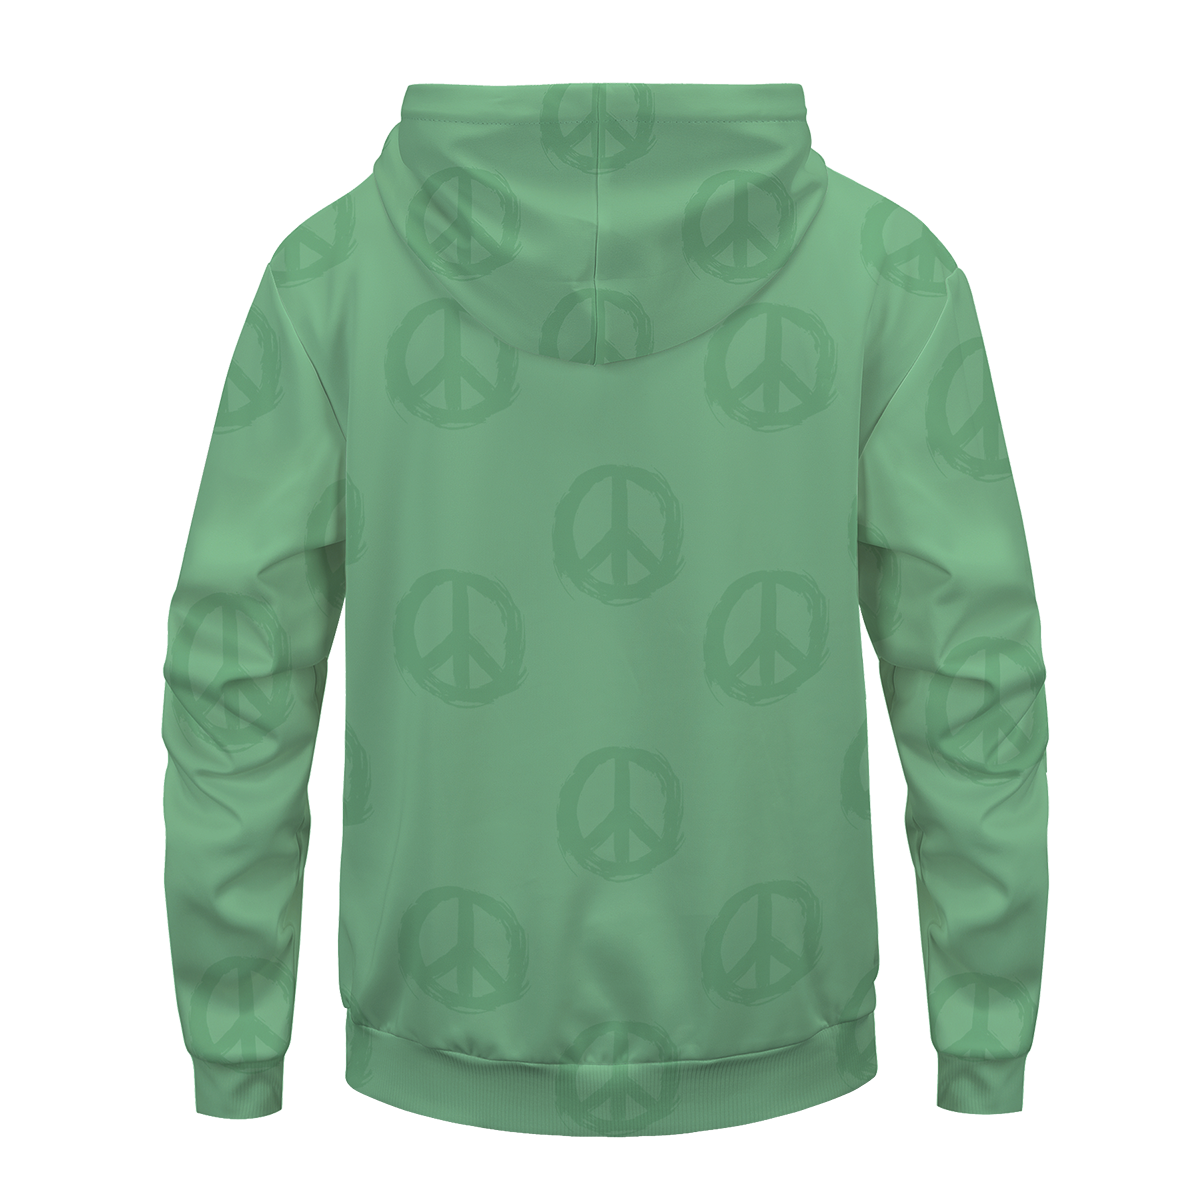 We come in peace for pizza Unisex Pullover Hoodie